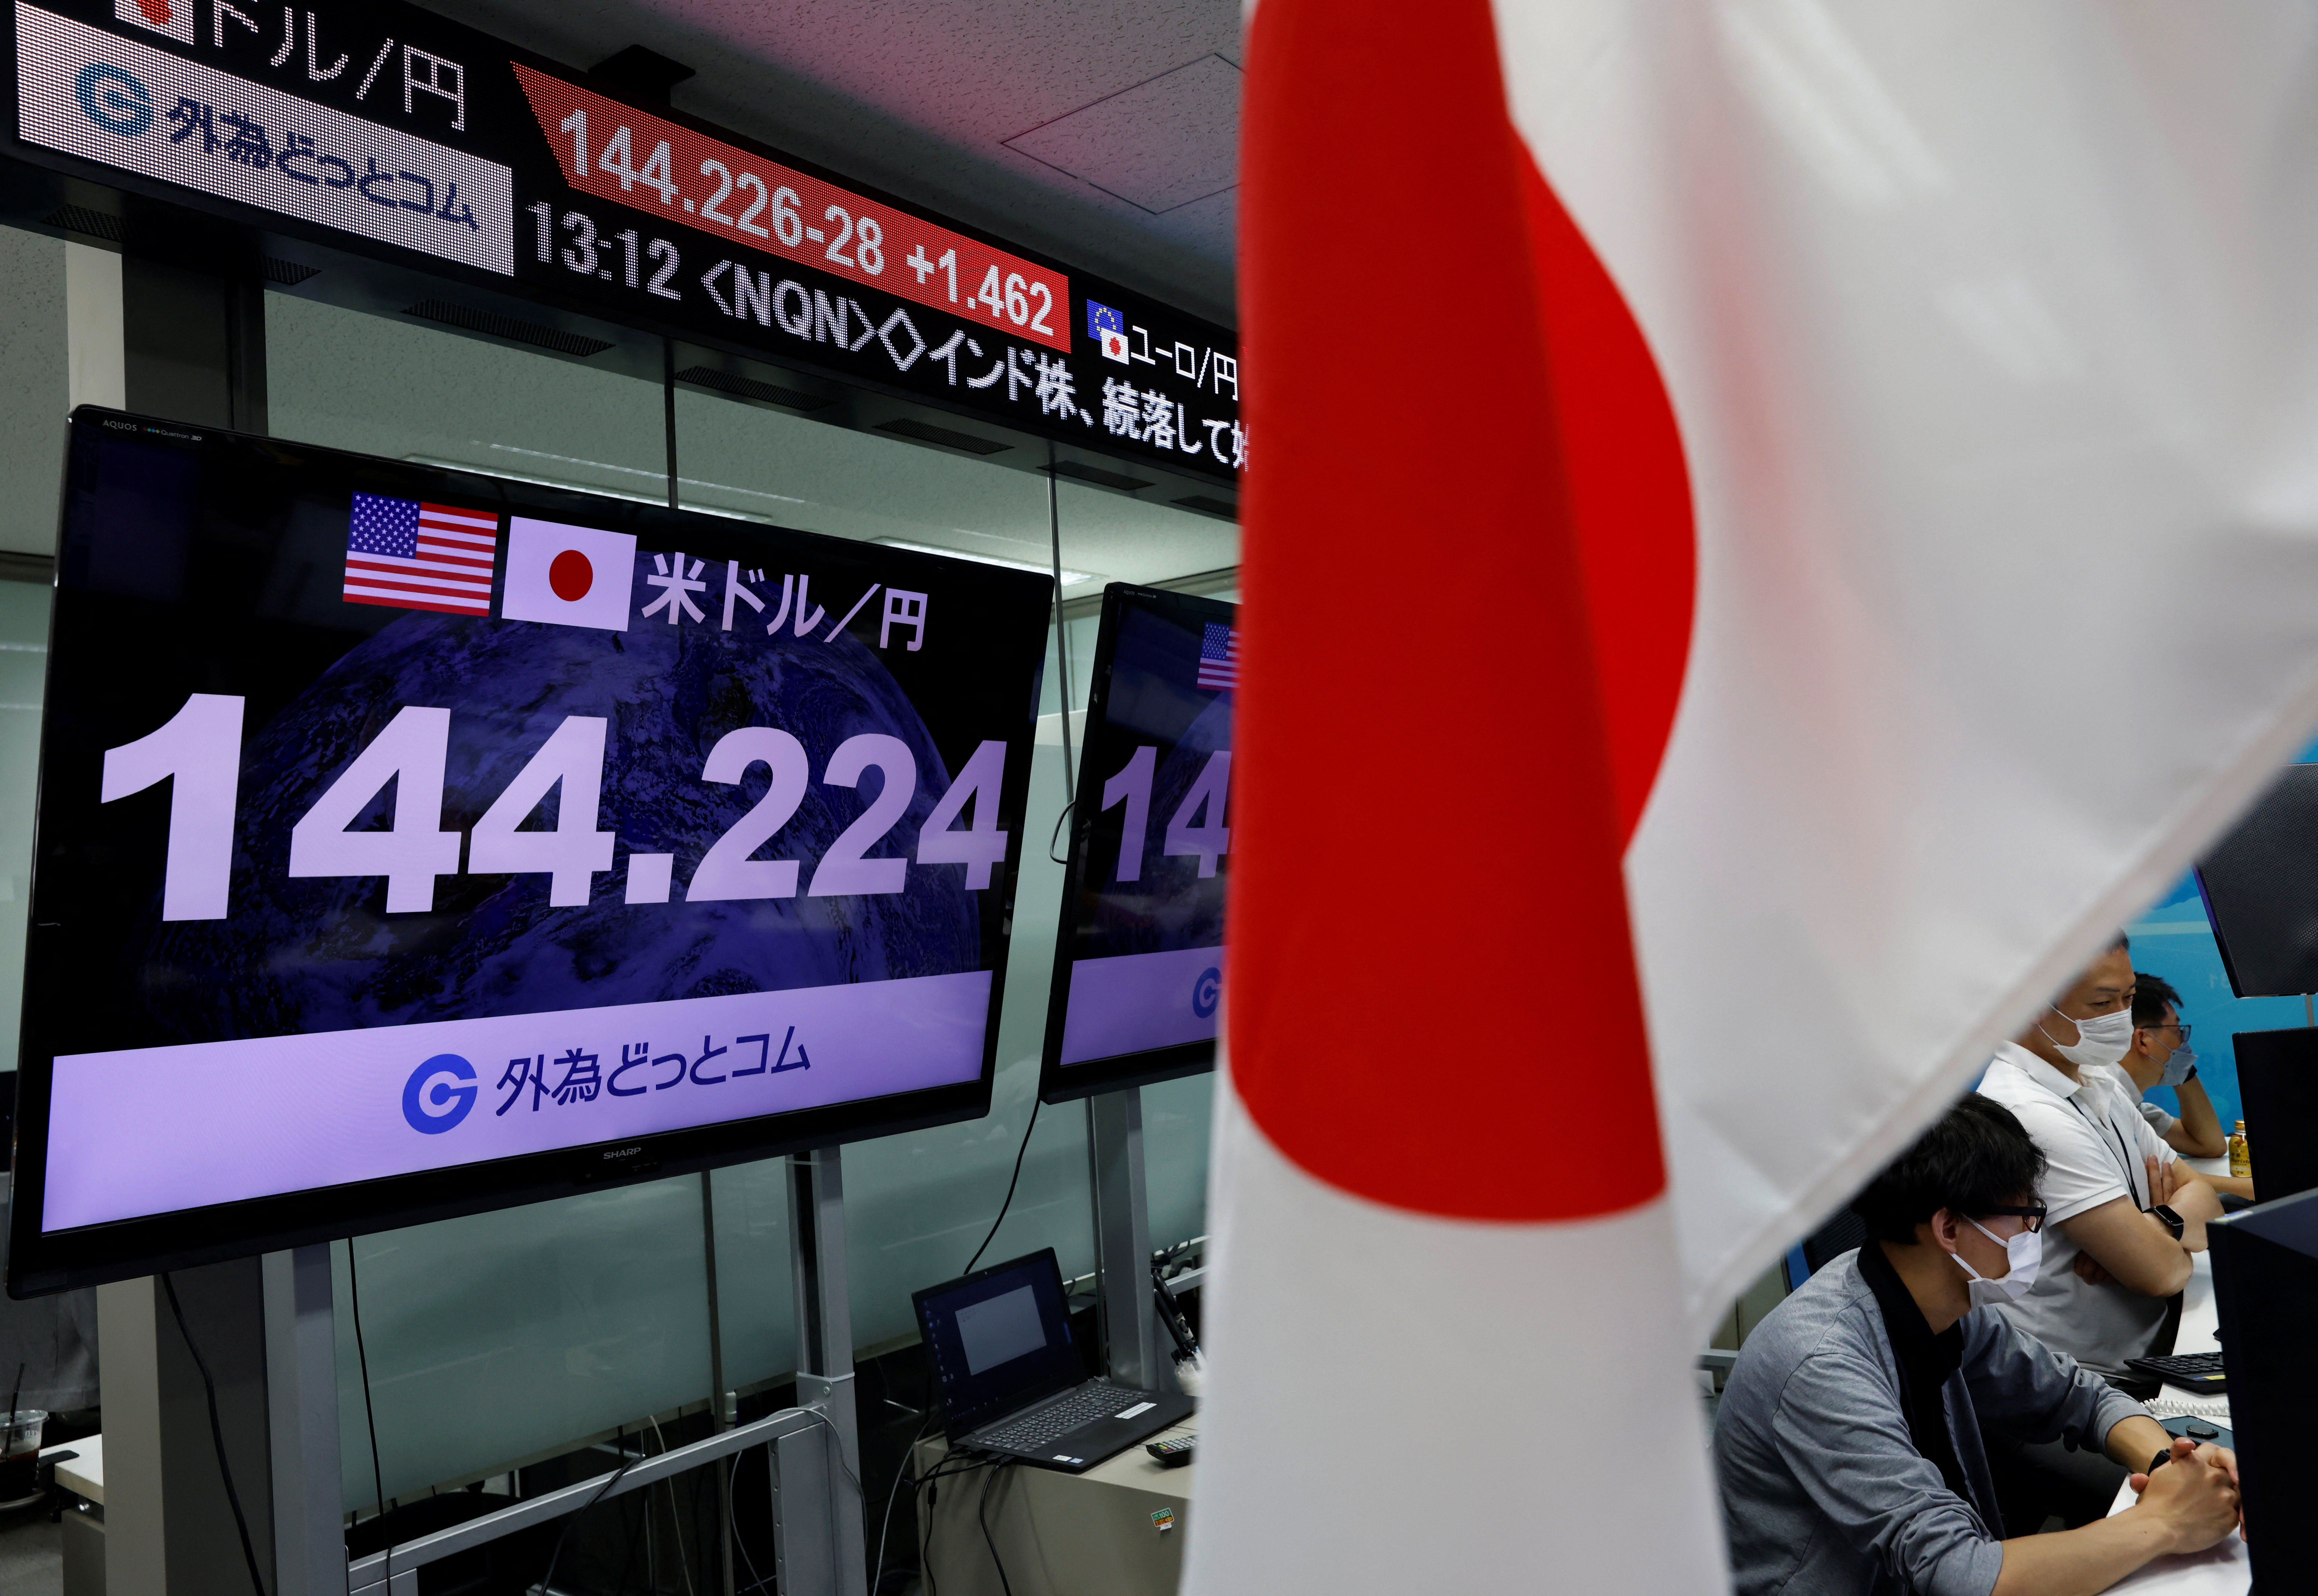 Employees of the foreign exchange trading company Gaitame.com work in front of monitors, in Tokyo